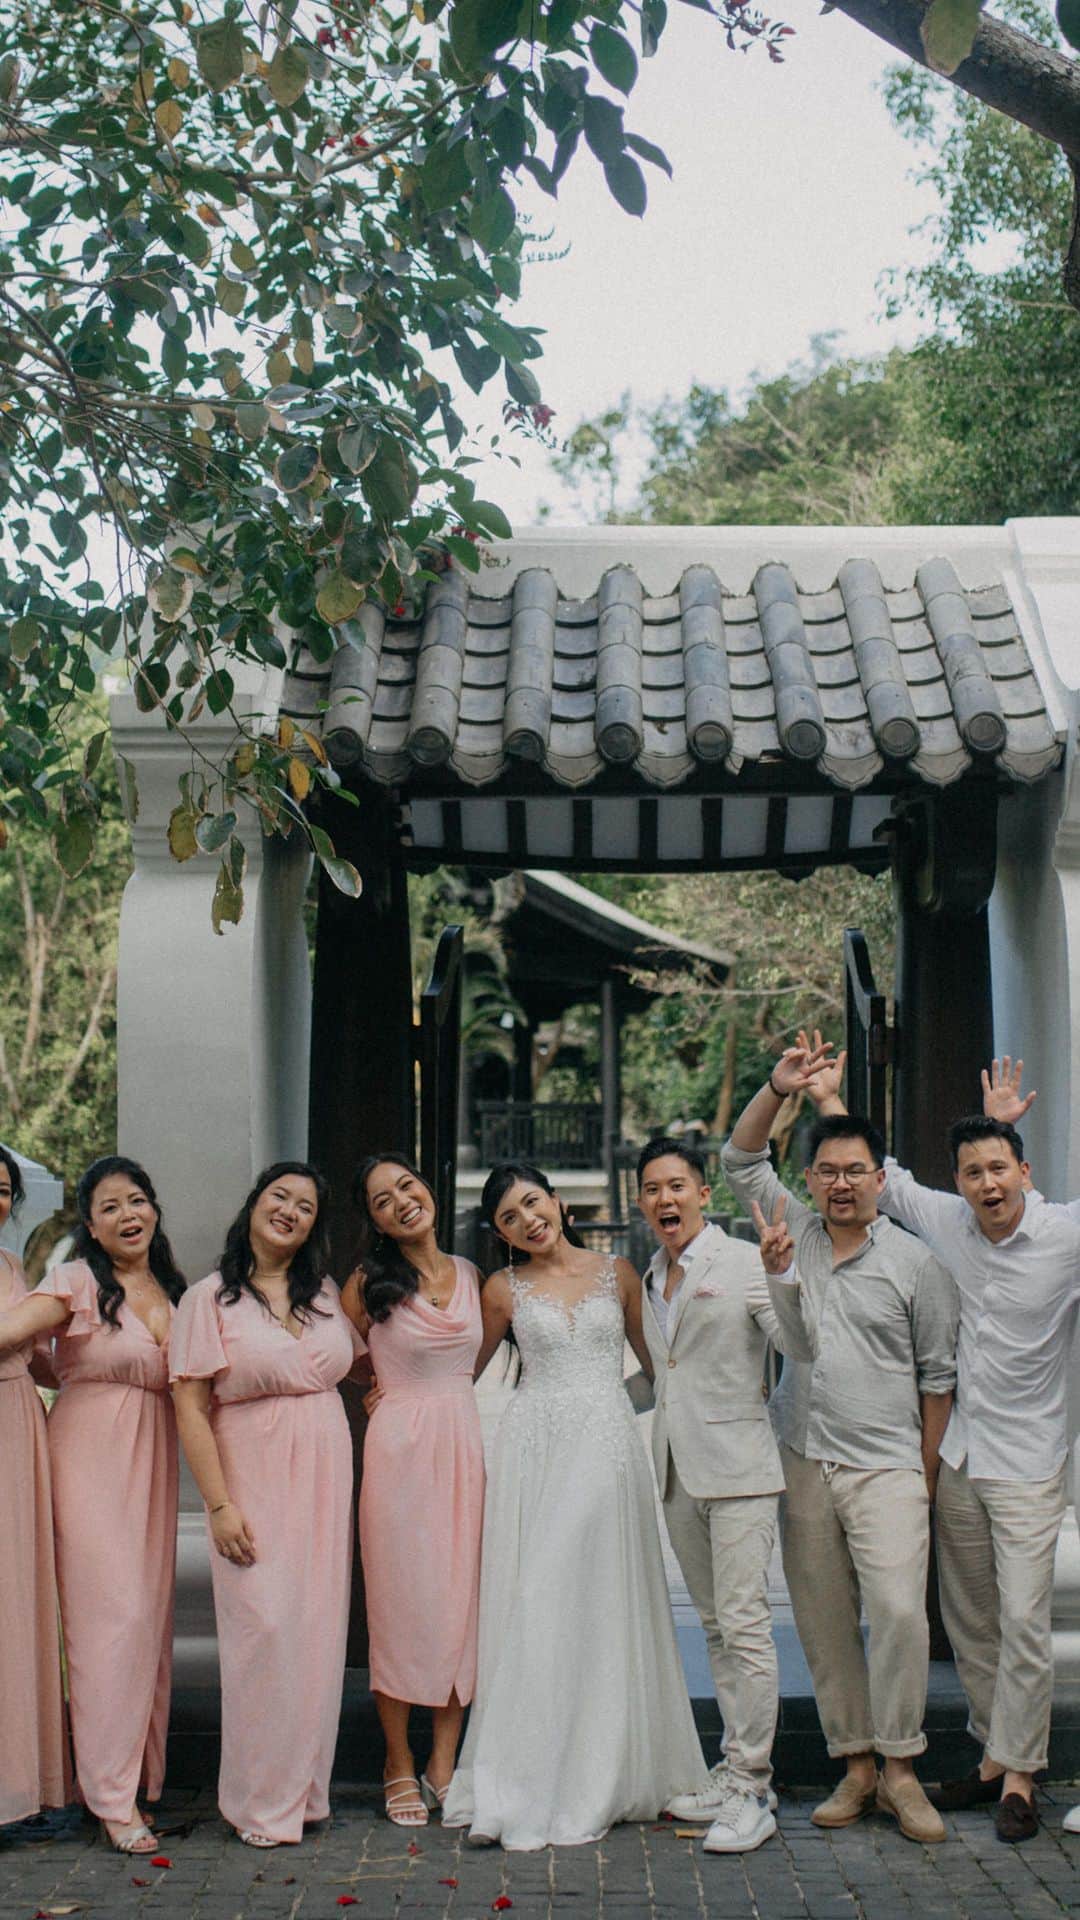 Kam Wai Suenのインスタグラム：「When your bridal party understood the assignment and gave it 200%💃🕺」